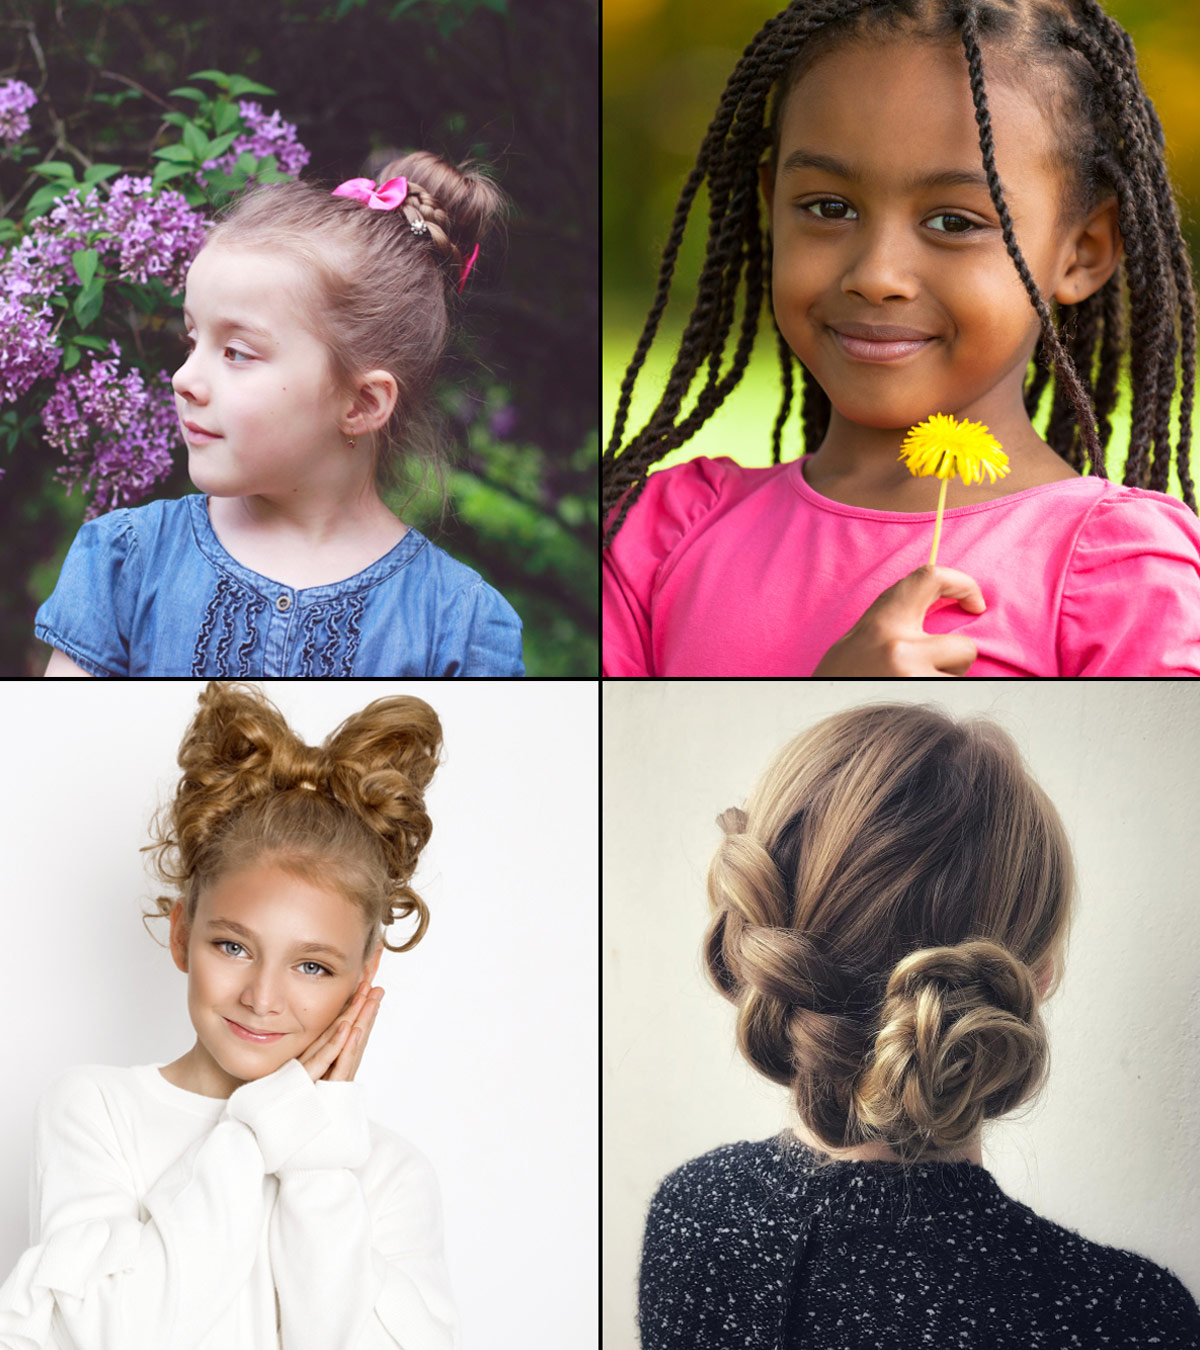 110500 Ponytail Hairstyle Stock Photos Pictures  RoyaltyFree Images   iStock  Half ponytail hairstyle